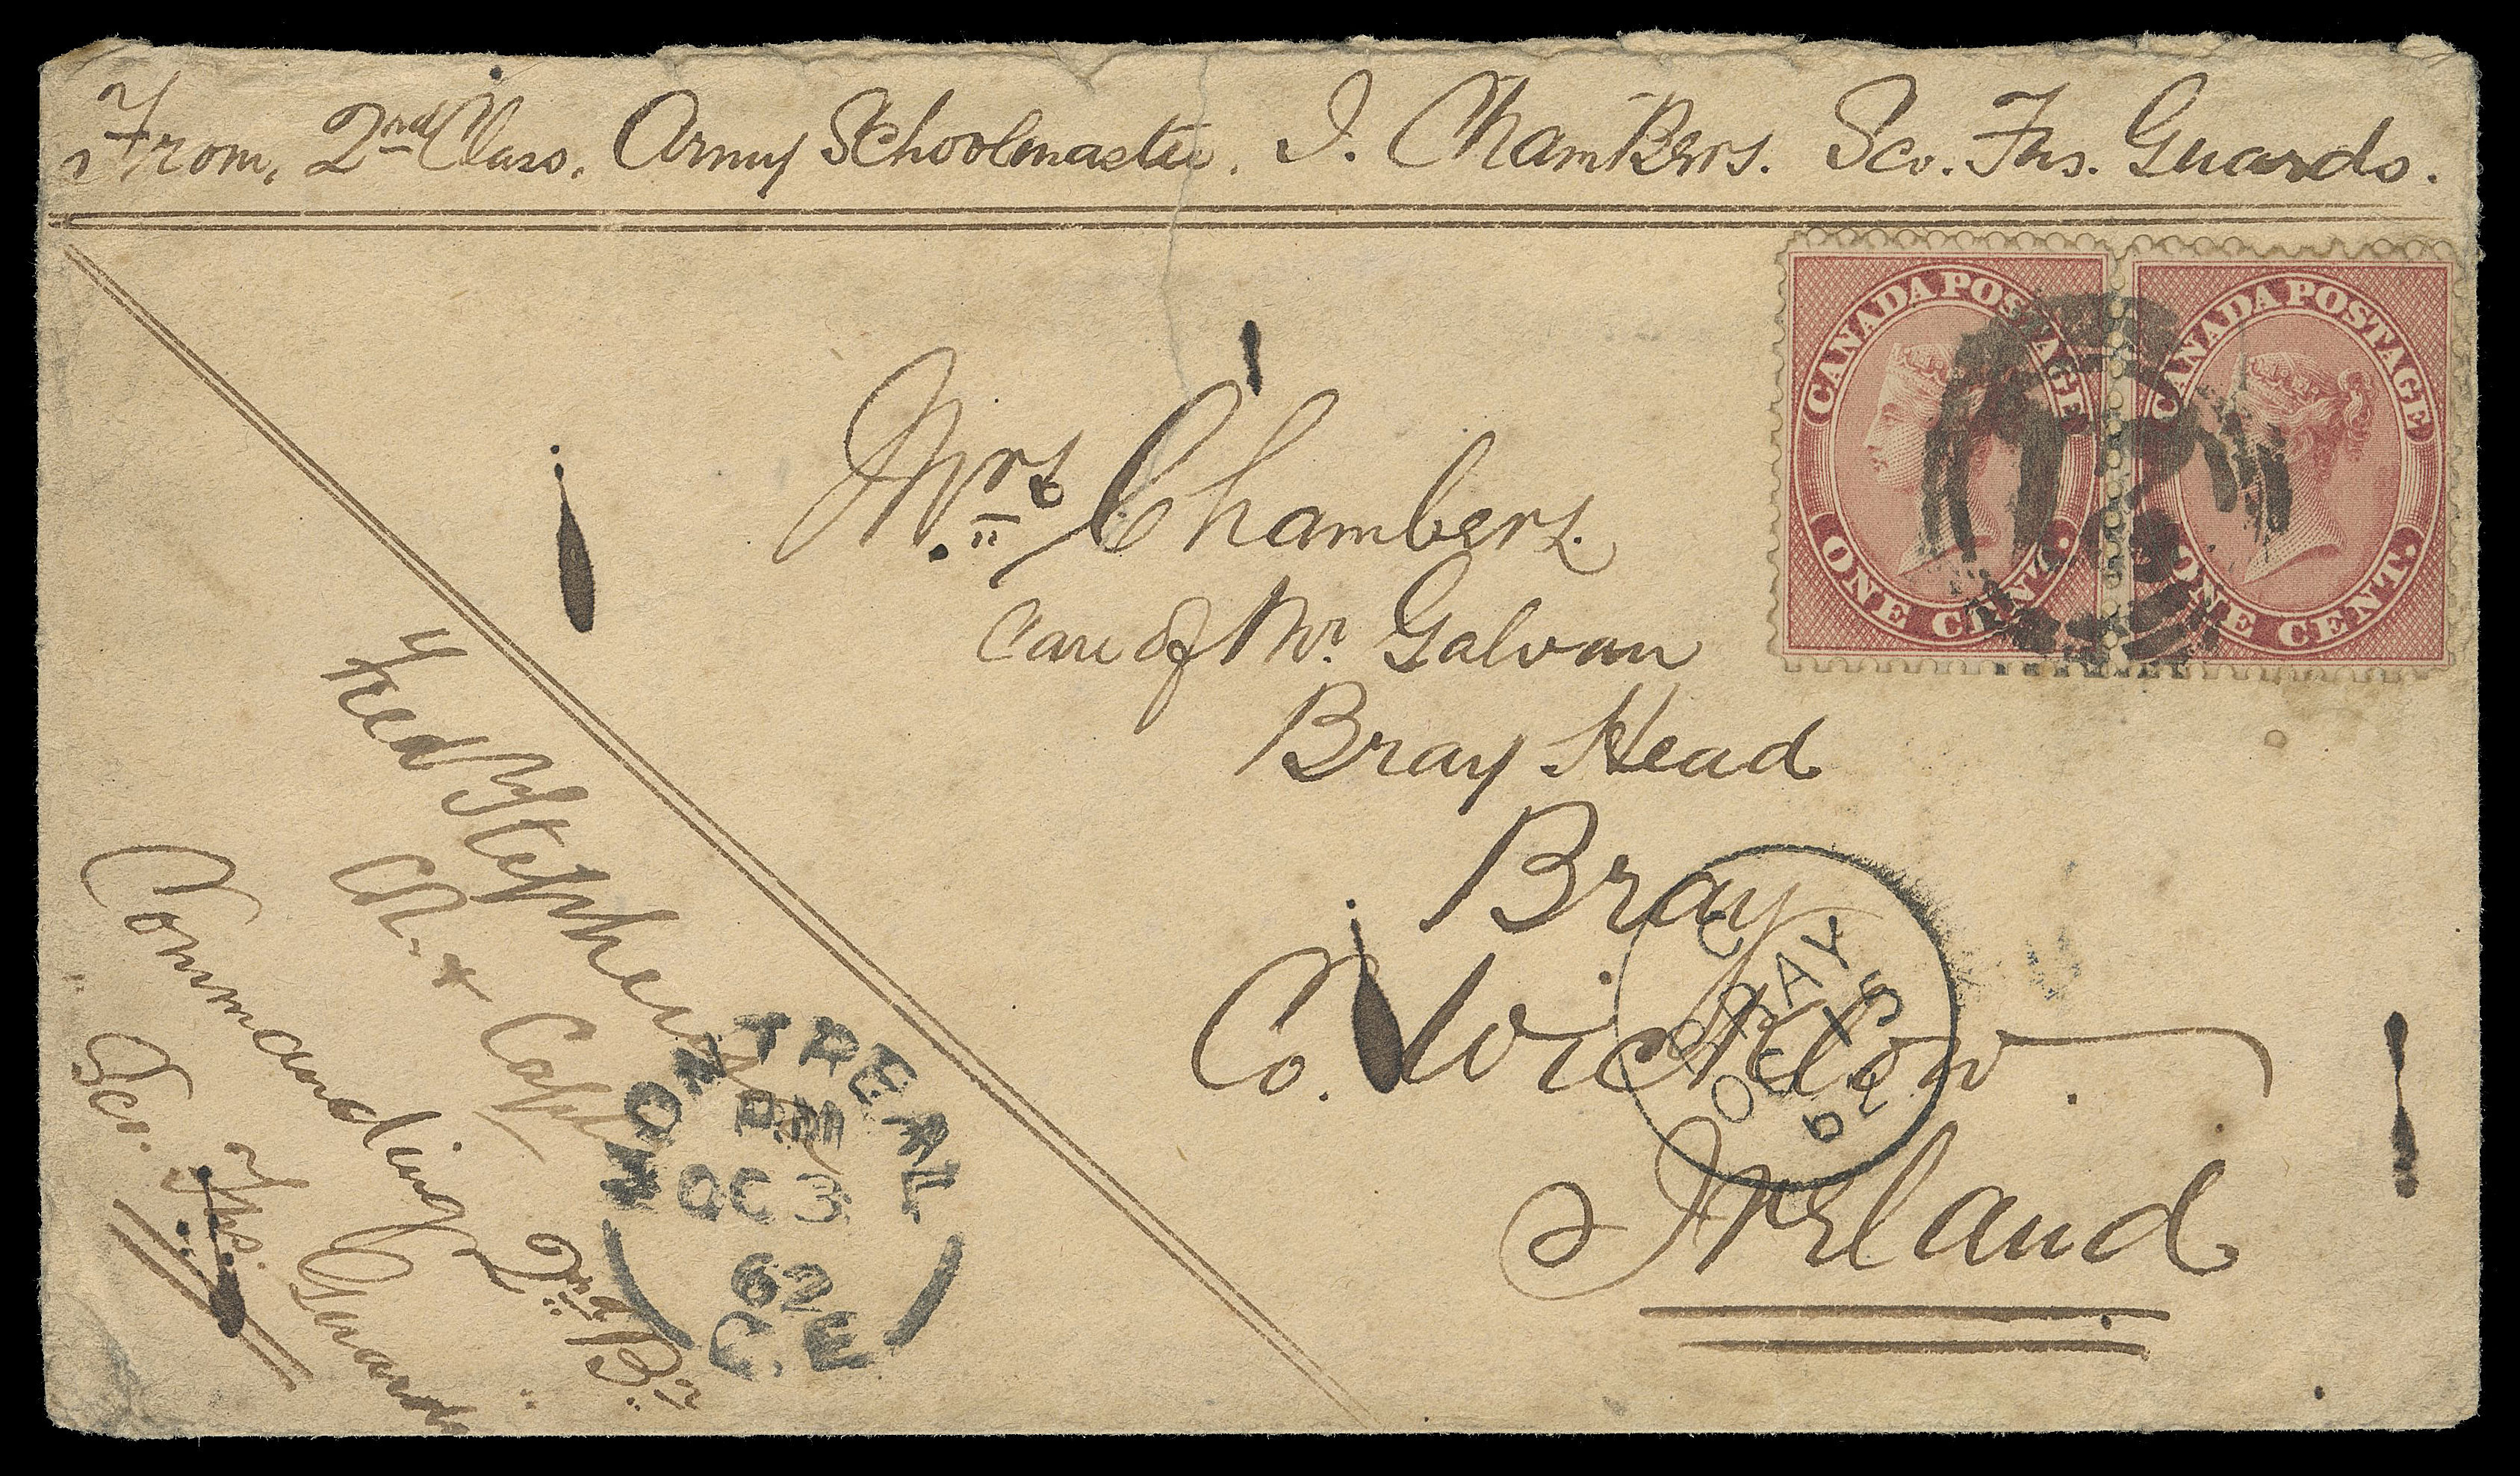 HALF PENNY AND ONE CENT  1862 (October 3) Military Concessionary rate from the well-known Chambers correspondence "From 2nd Class Army Schoolmaster J. Chambers Sco. Fus. Guards" countersigned by Commander Officer and addressed to Bray, Ireland, light overall ageing, diagonal cover crease clear of franking and light edge wrinkling just touches upper right corner of the nicely centered horizontal pair of 1c deep rose, perf 11¾, tied by bold, centrally struck four-ring 